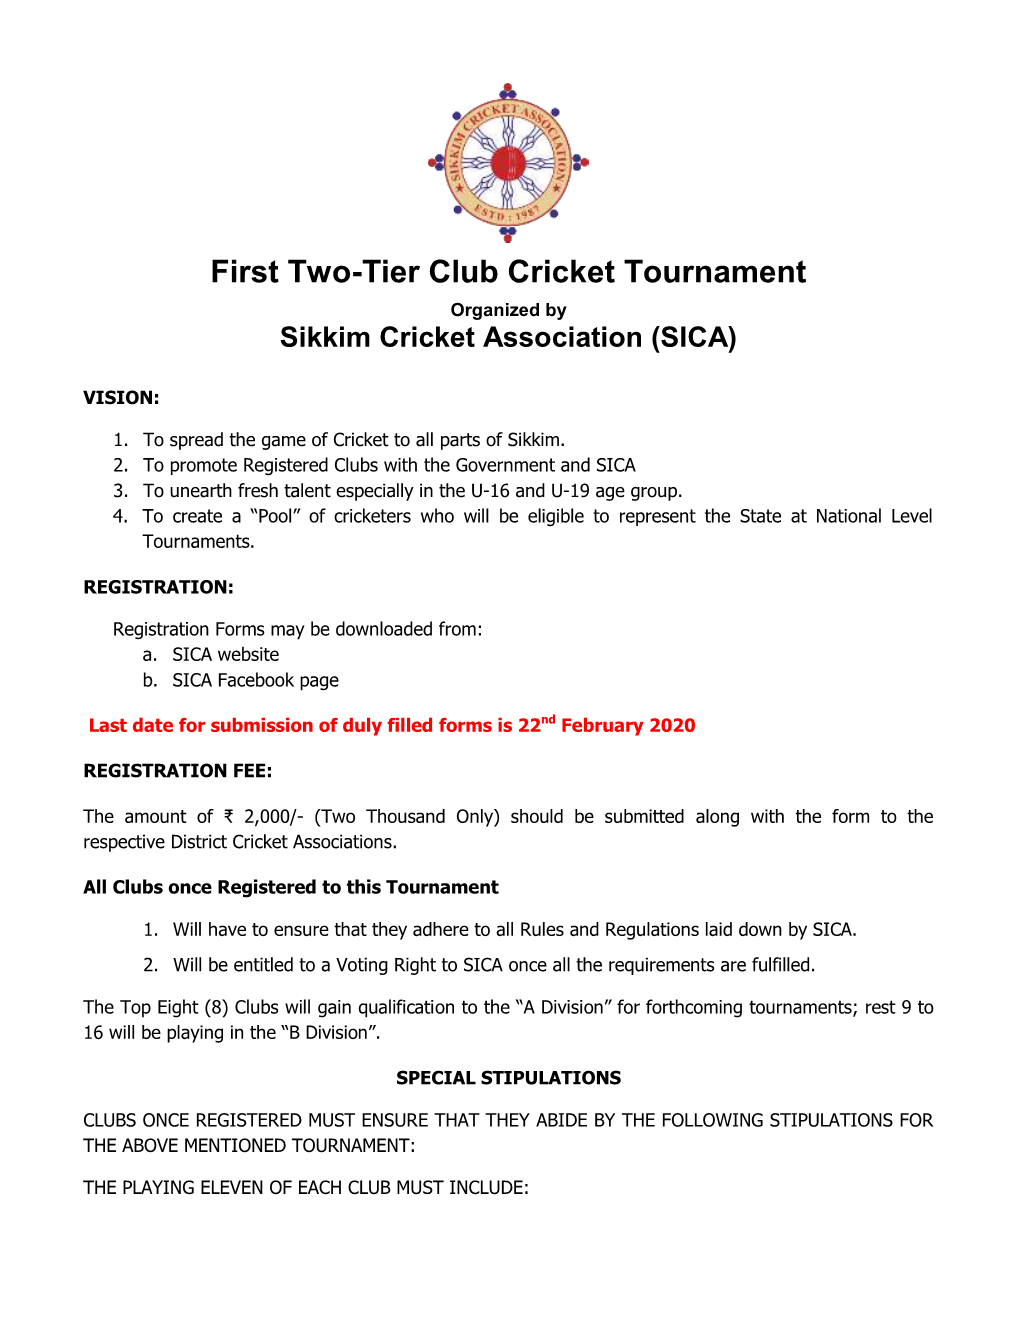 First Two-Tier Club Cricket Tournament Organized by Sikkim Cricket Association (SICA)